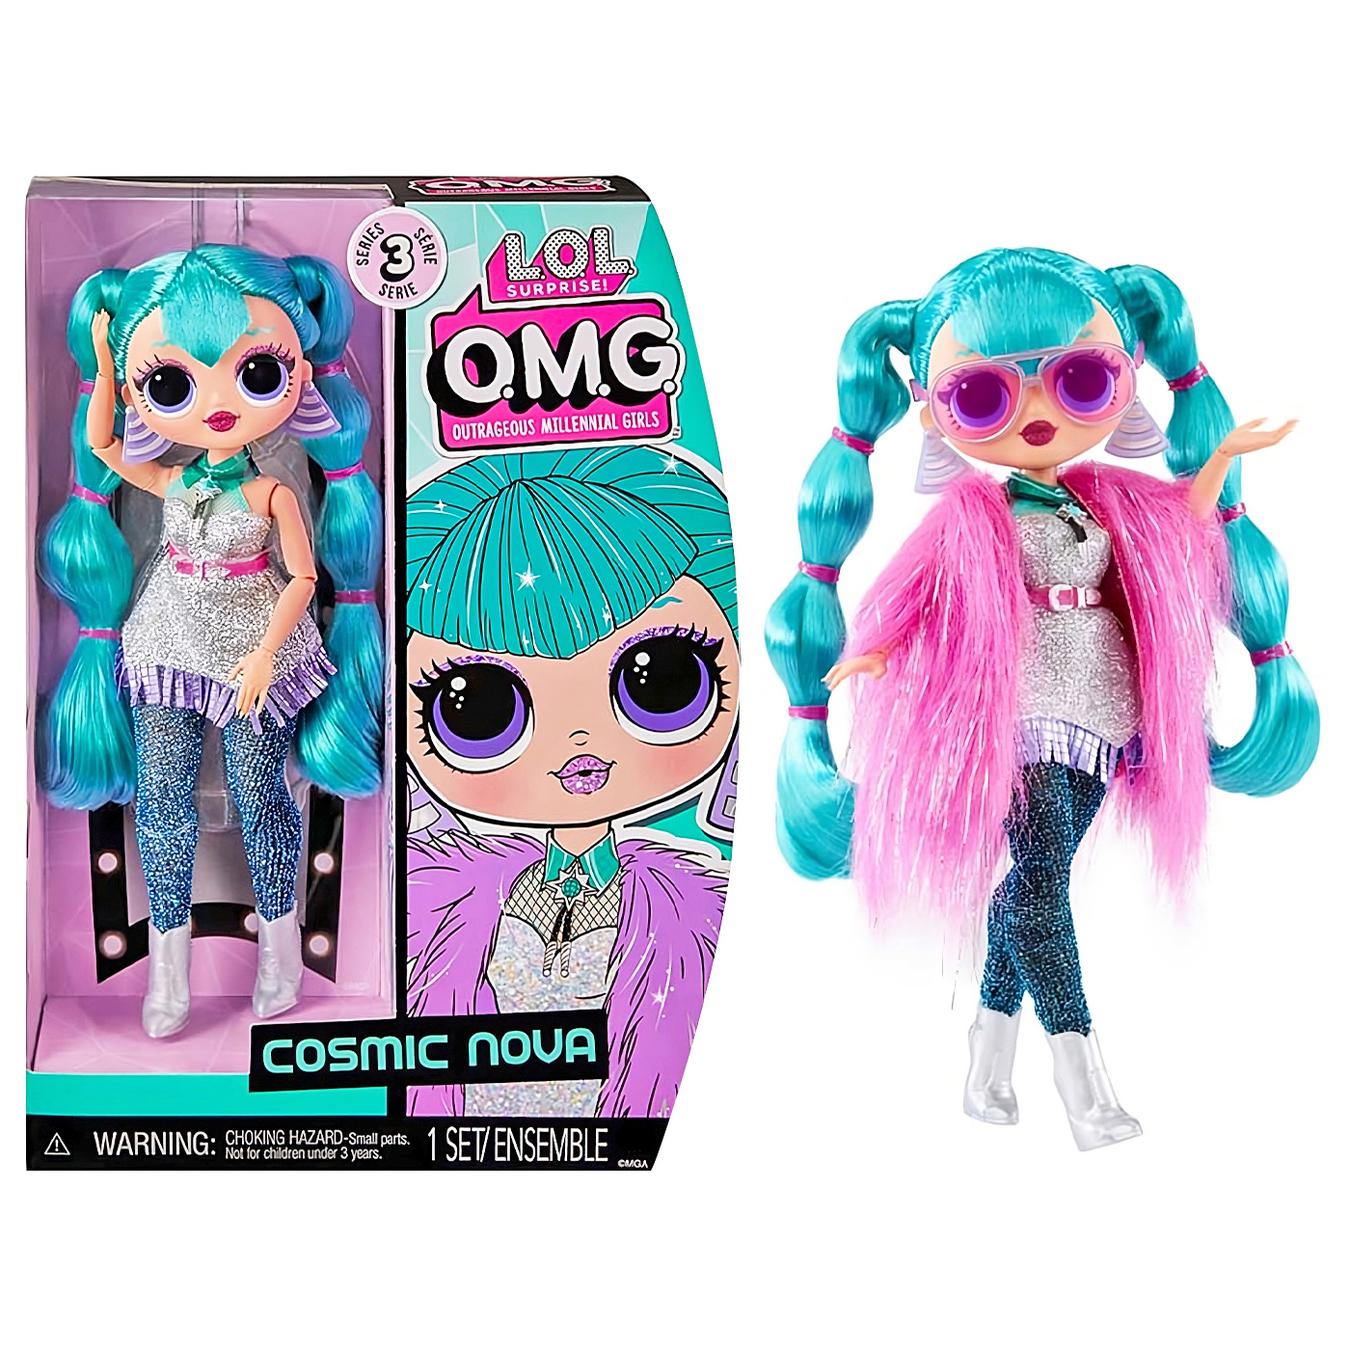 Doll L.O.L. Surprise! series omg Hos s3 space star with access